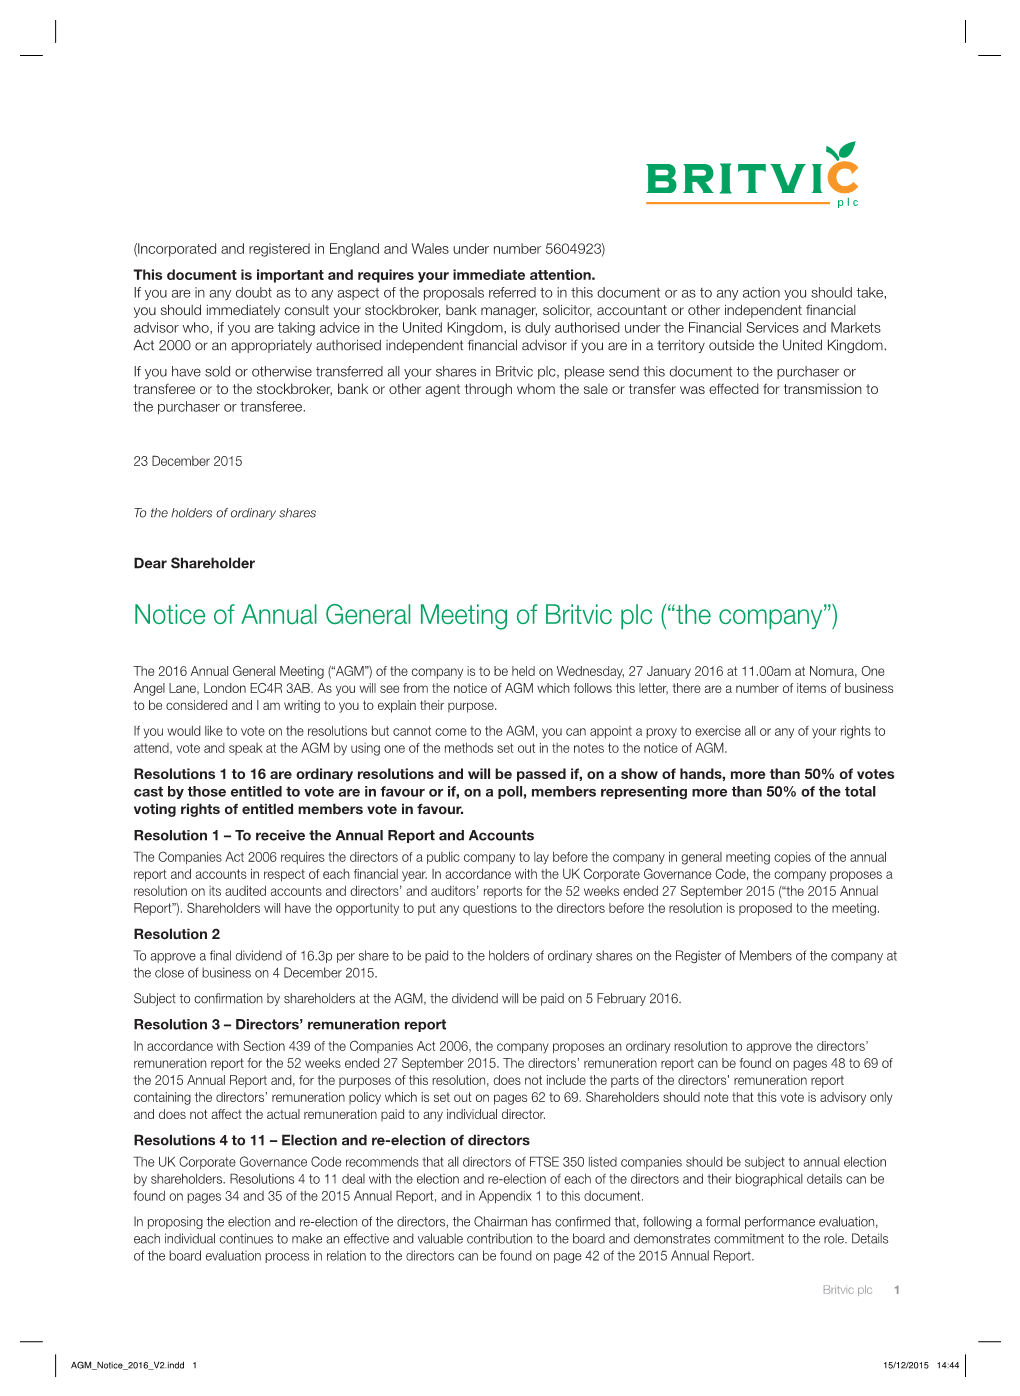 Notice of Annual General Meeting of Britvic Plc (“The Company”)